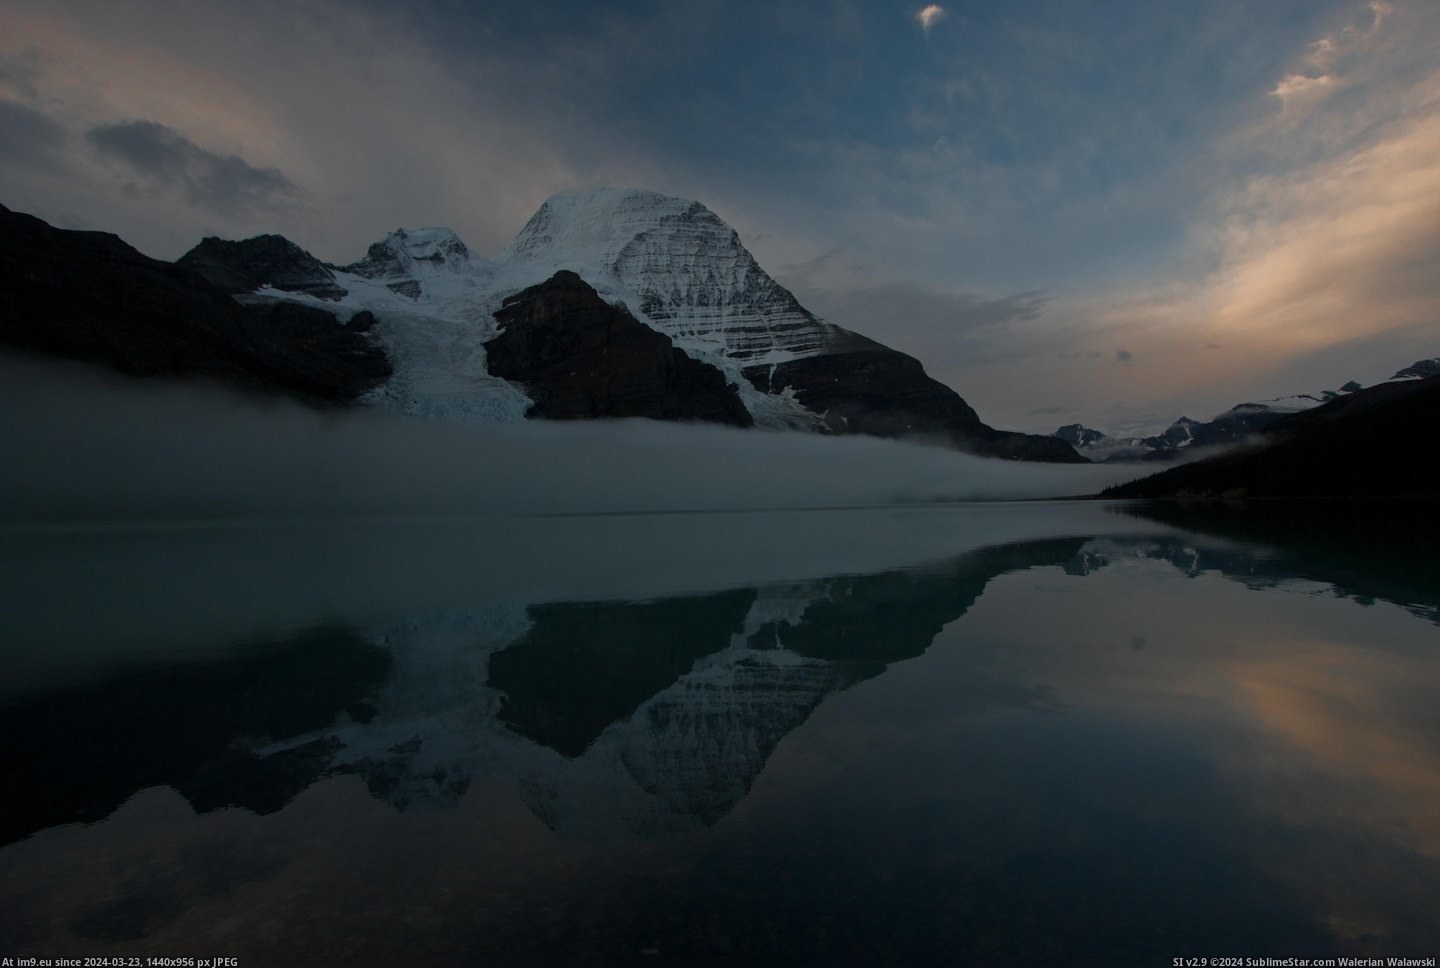 #Park #Morning #Lake #Fog #Robson #Prov #Berg #Canada #Early #Mount [Earthporn] Early morning fog, Mount Robson over Berg Lake, Mount Robson Prov Park, BC, Canada [3888 × 2592] [OC] Pic. (Image of album My r/EARTHPORN favs))